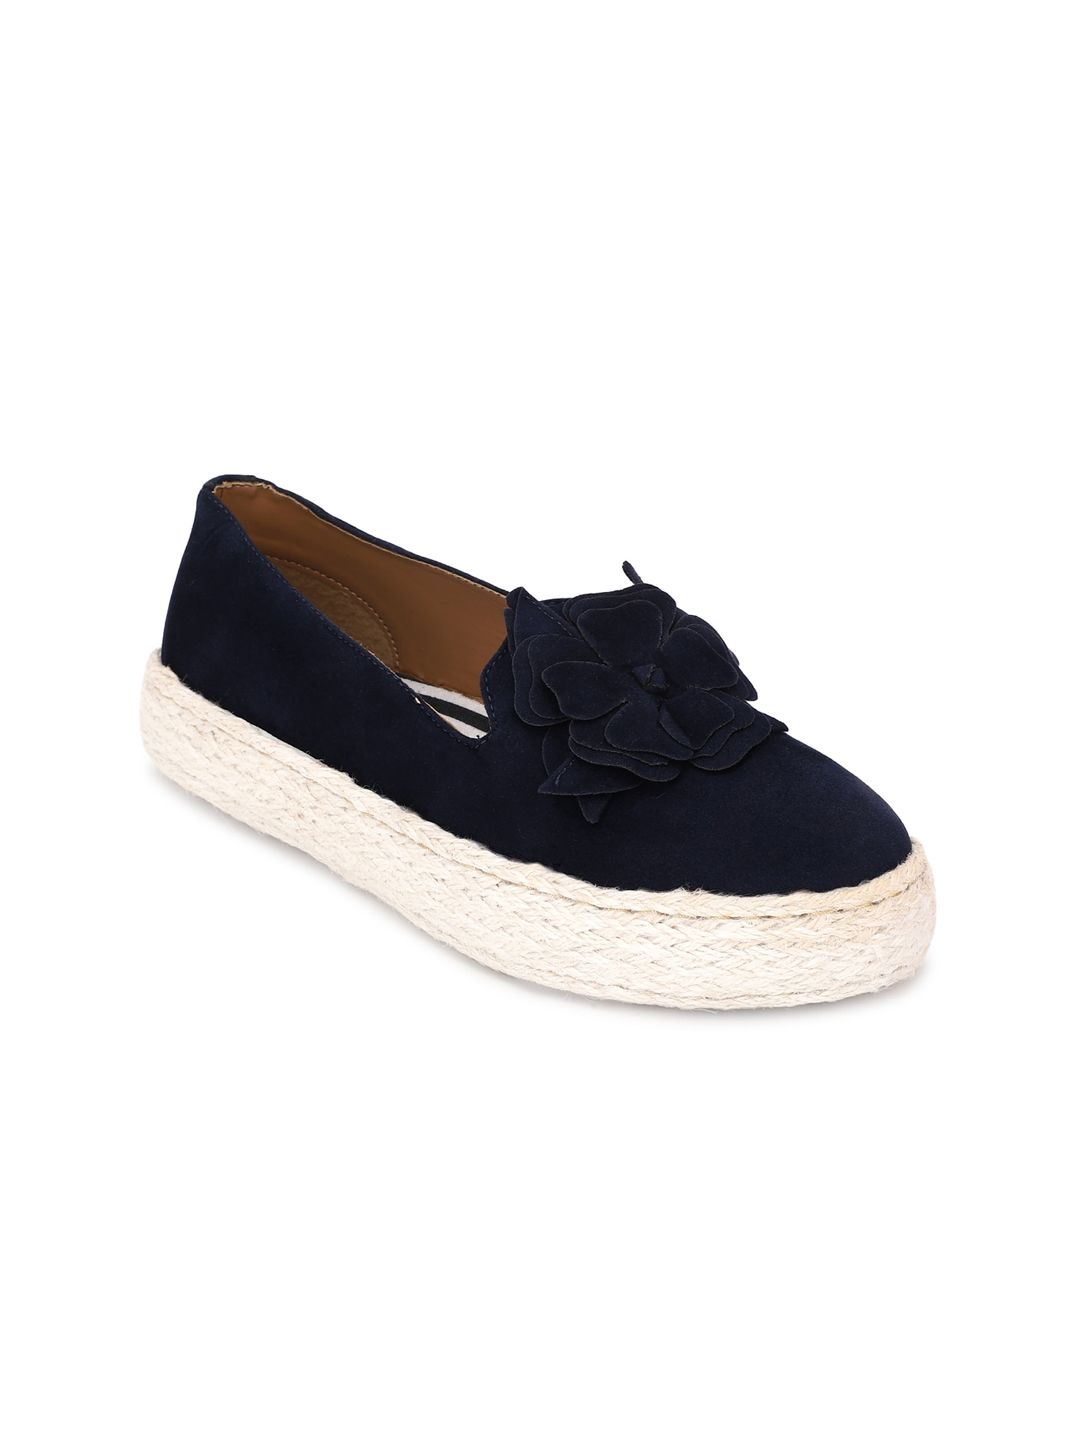 FOREVER 21 Women Navy Blue Suede Loafers Price in India